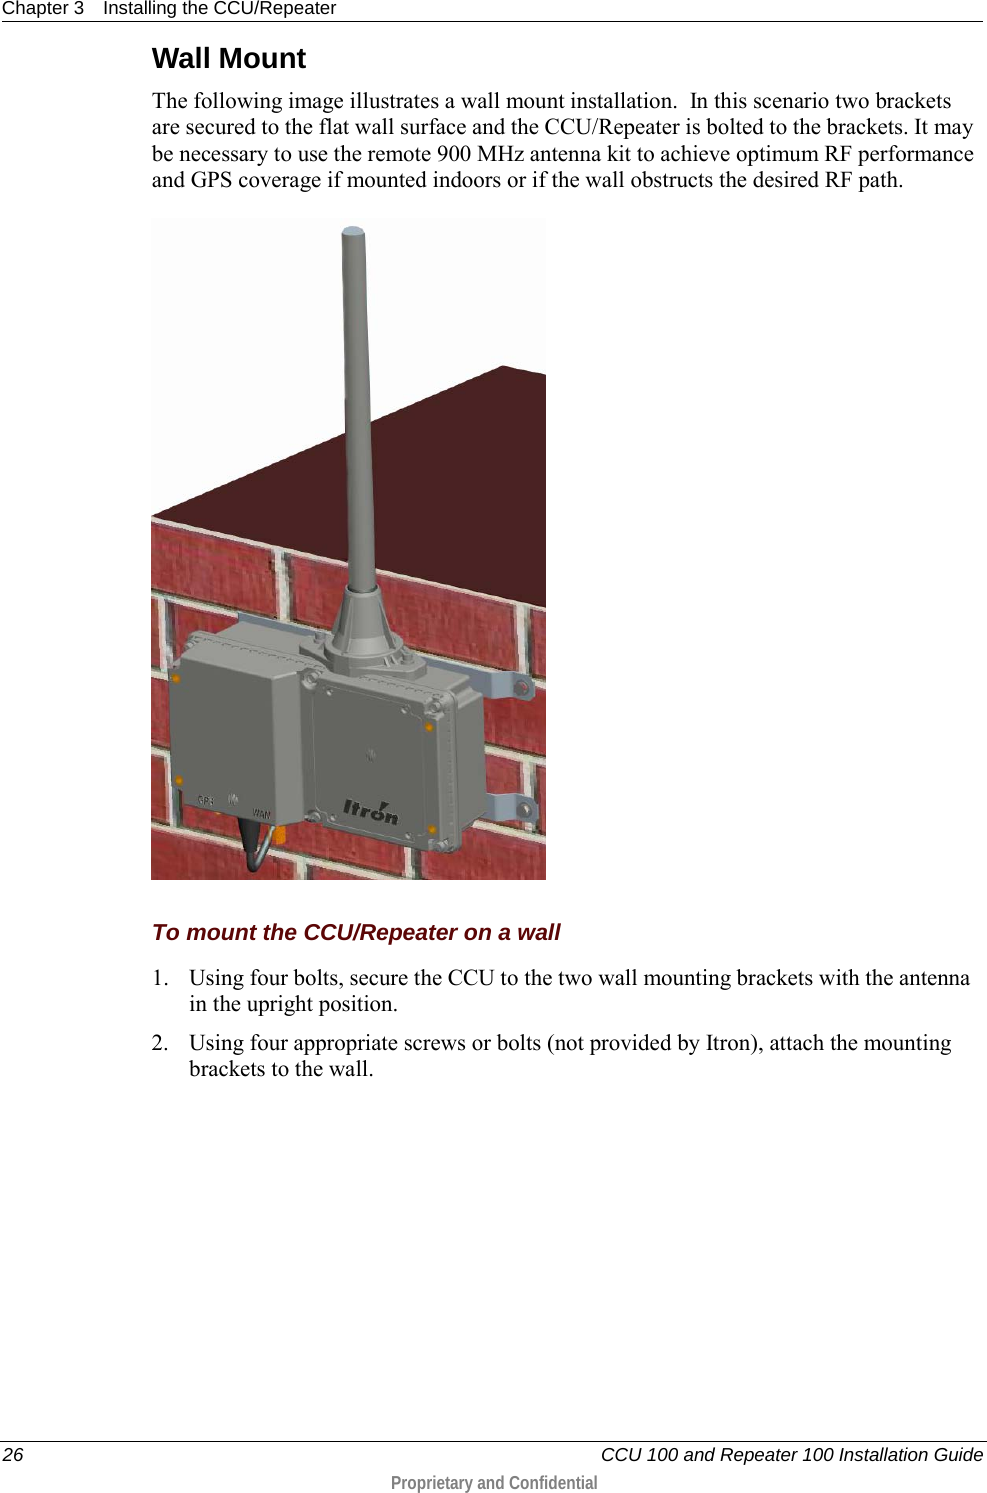 Chapter 3 Installing the CCU/Repeater  26   CCU 100 and Repeater 100 Installation Guide  Proprietary and Confidential  Wall Mount The following image illustrates a wall mount installation.  In this scenario two brackets are secured to the flat wall surface and the CCU/Repeater is bolted to the brackets. It may be necessary to use the remote 900 MHz antenna kit to achieve optimum RF performance and GPS coverage if mounted indoors or if the wall obstructs the desired RF path.   To mount the CCU/Repeater on a wall 1. Using four bolts, secure the CCU to the two wall mounting brackets with the antenna in the upright position. 2. Using four appropriate screws or bolts (not provided by Itron), attach the mounting brackets to the wall.   